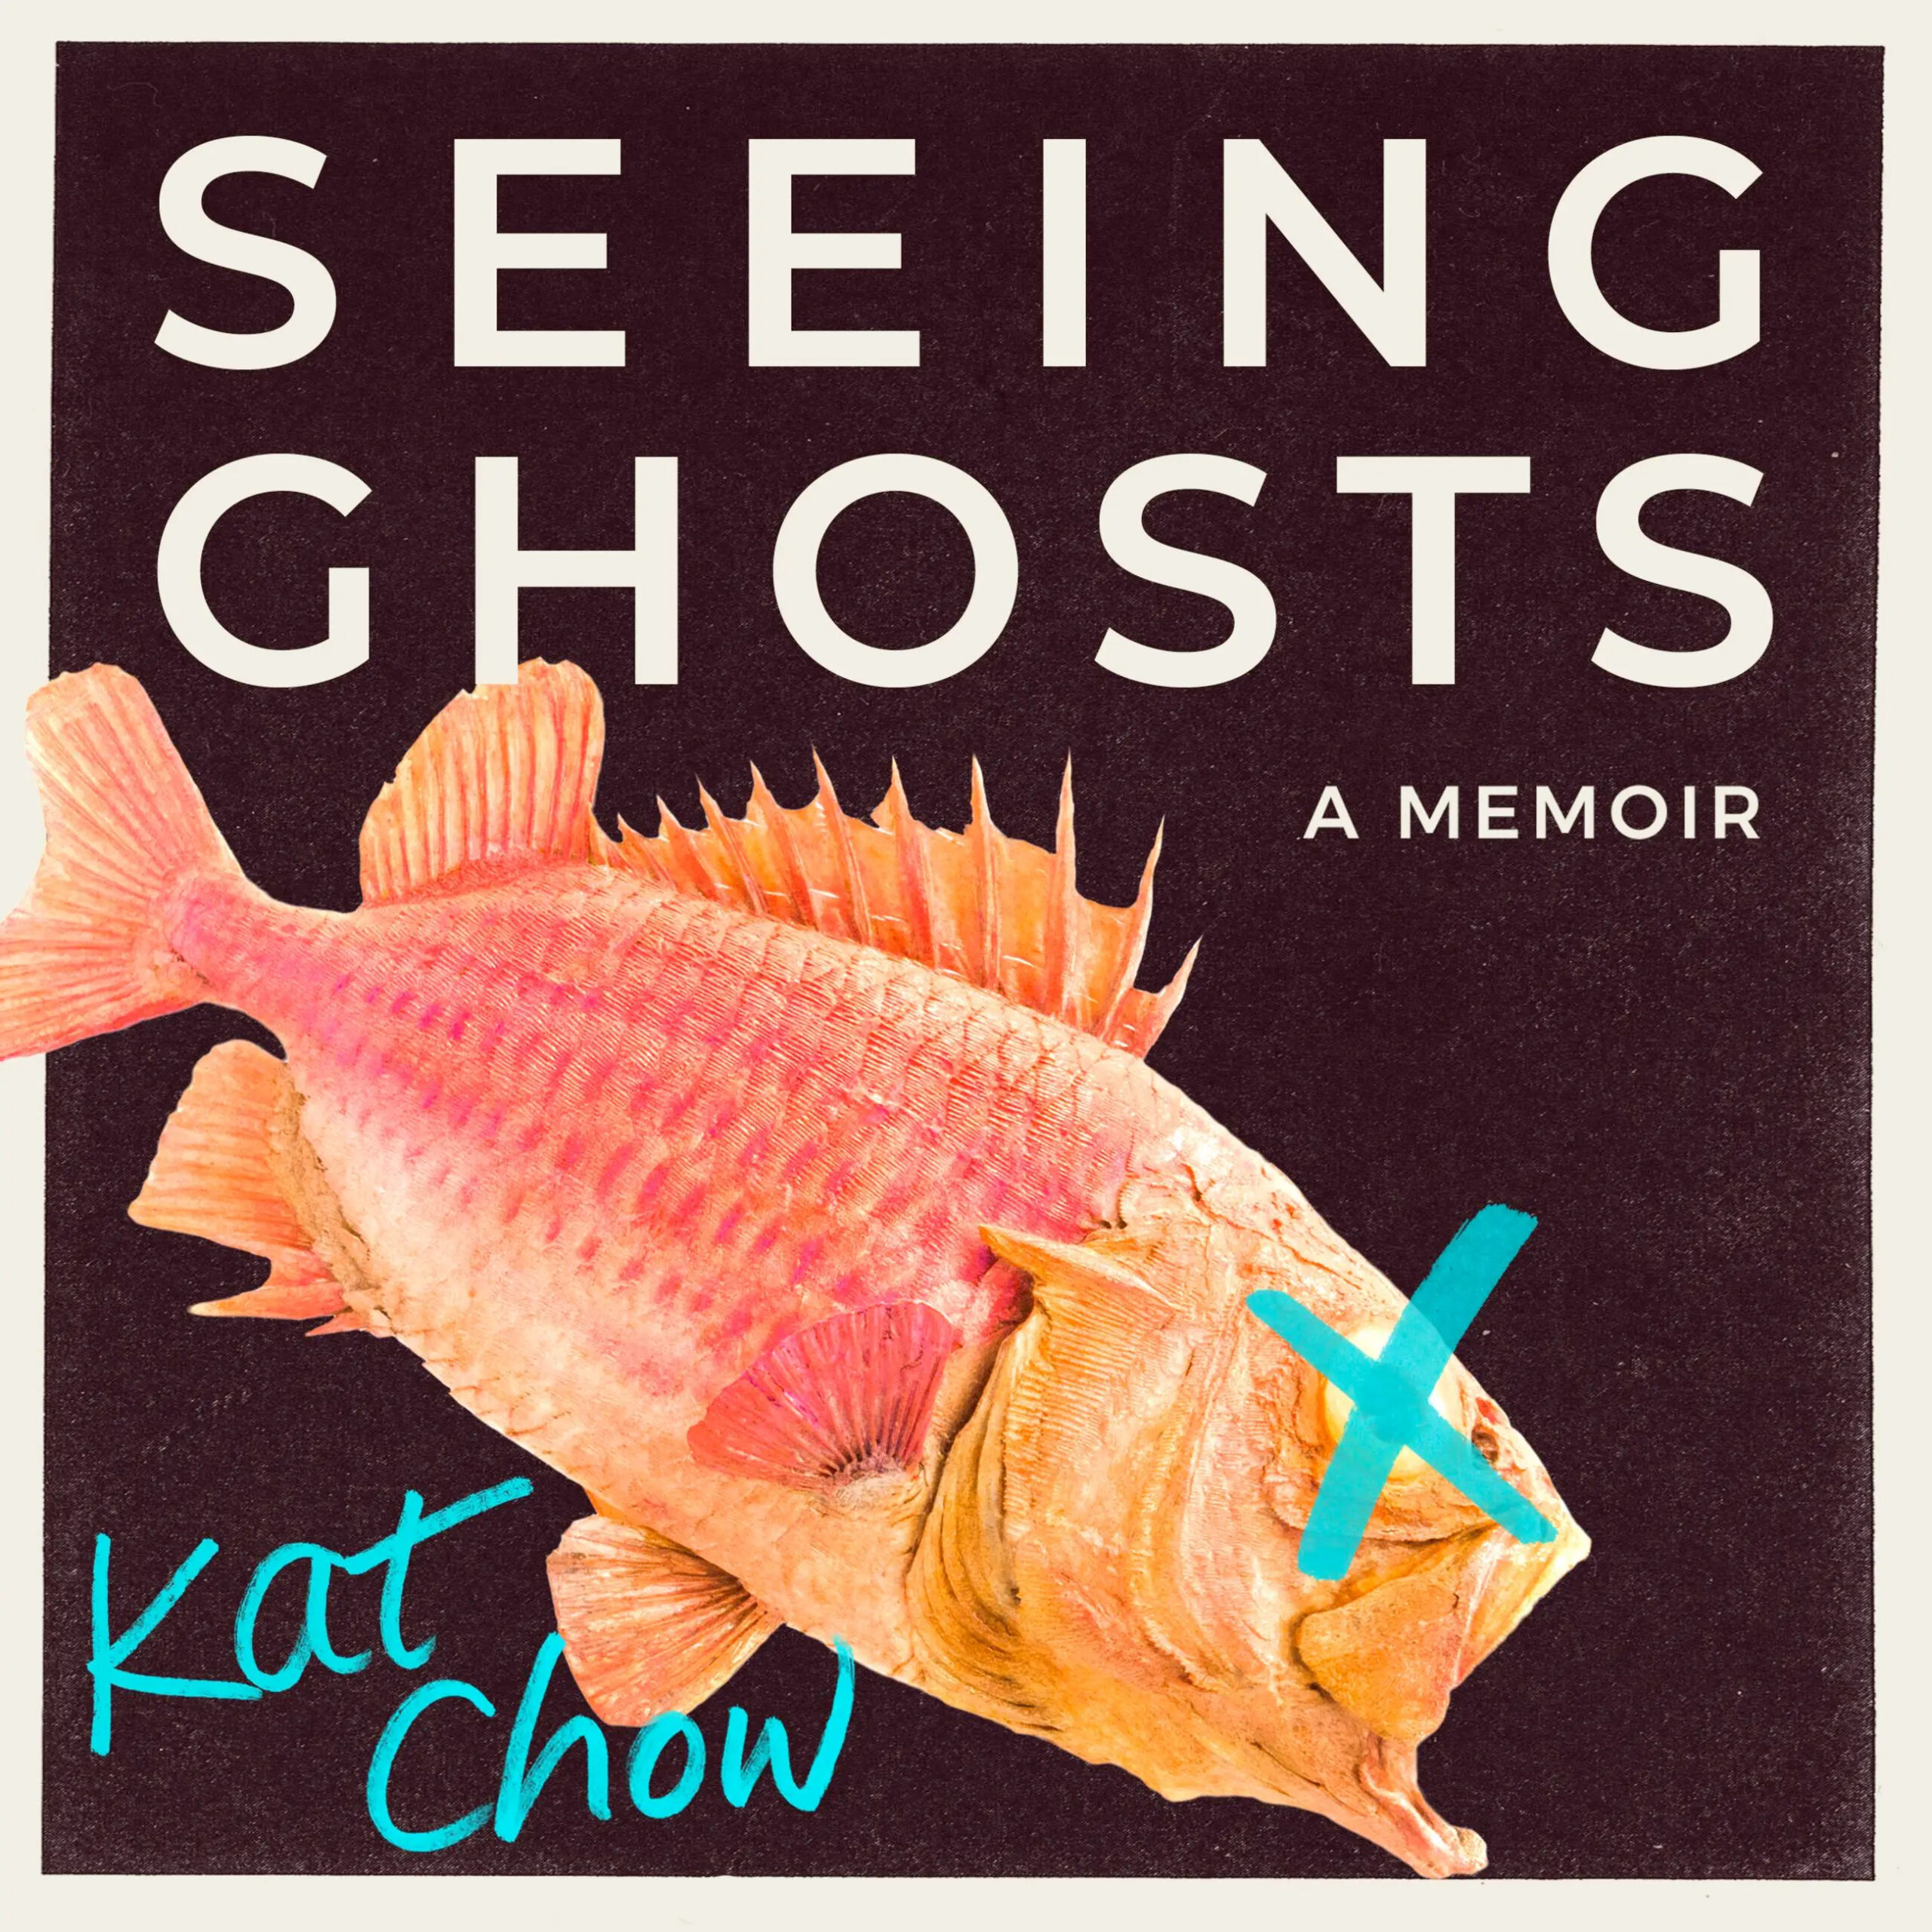 Book cover: Seeing Ghosts by Kat Chow